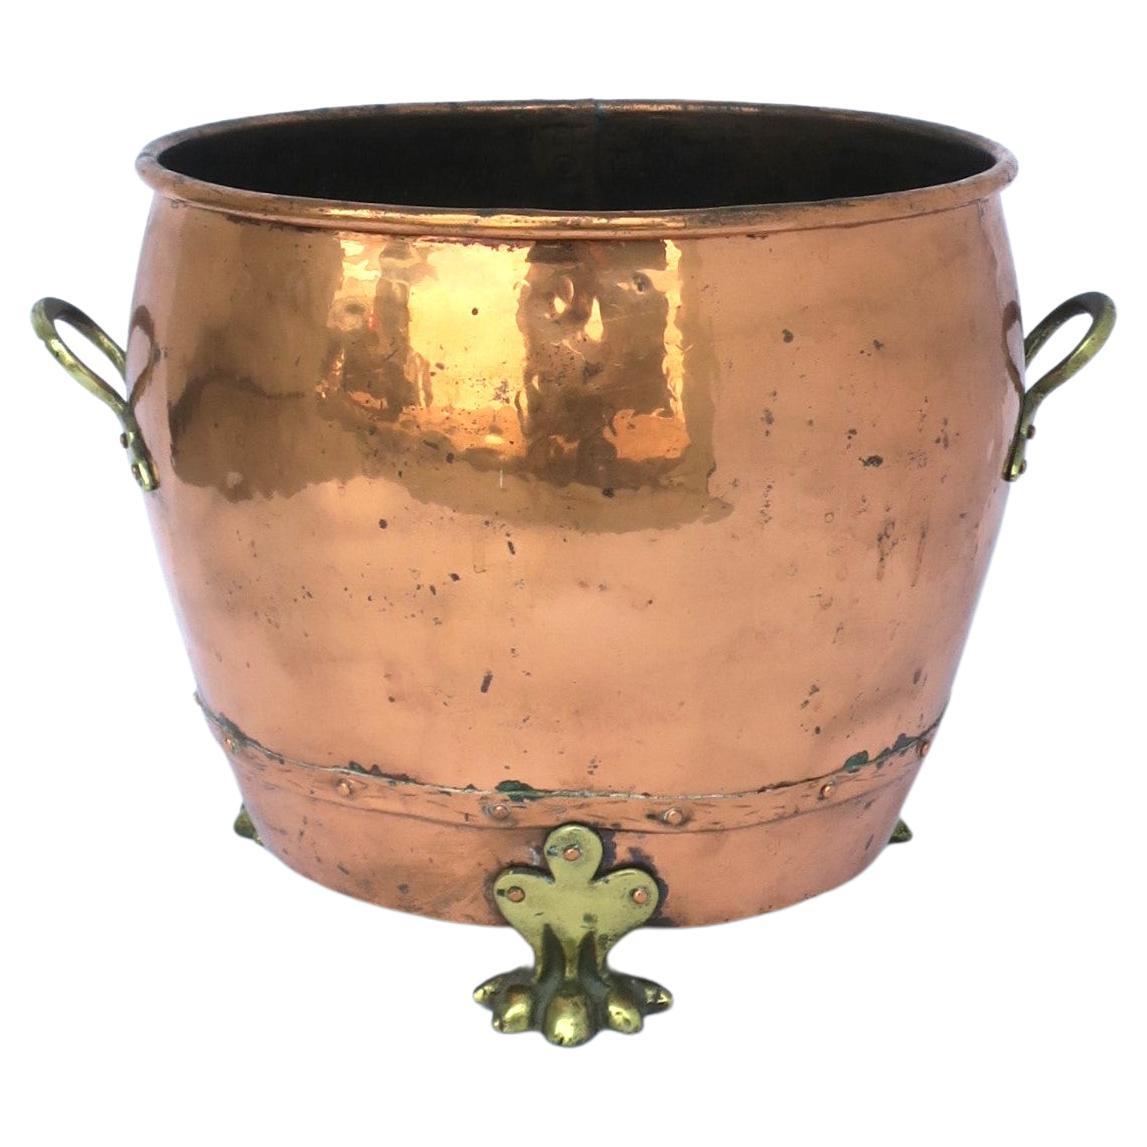 English Copper and Brass Fireplace Chimney or Firewood Pot with Lion Paw Feet